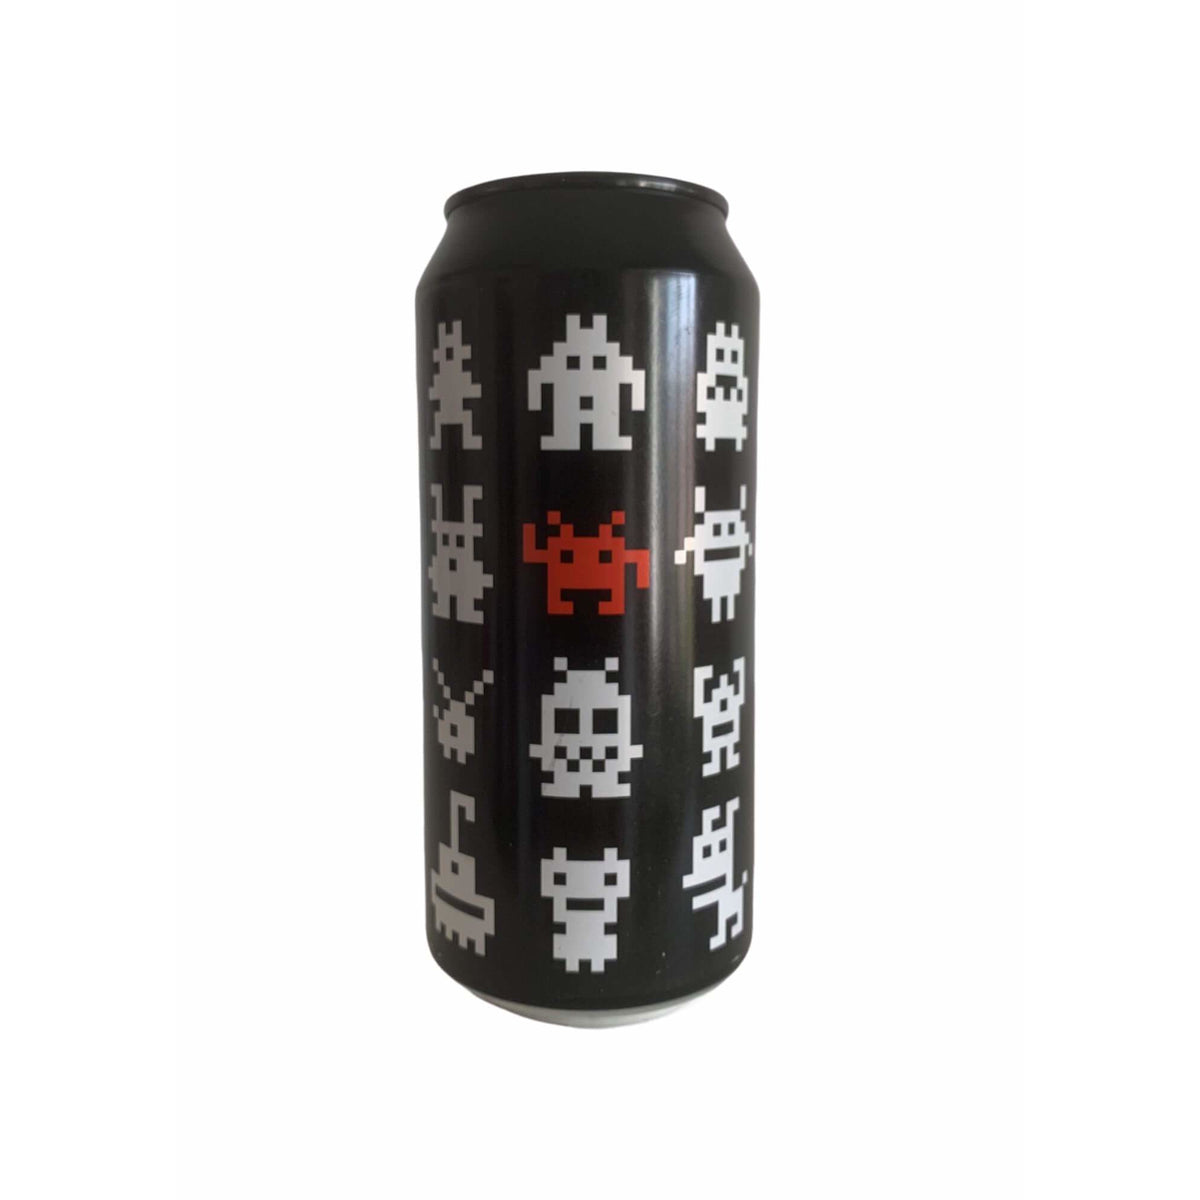 Invaders | Laugar Brewery - Cans & Corks